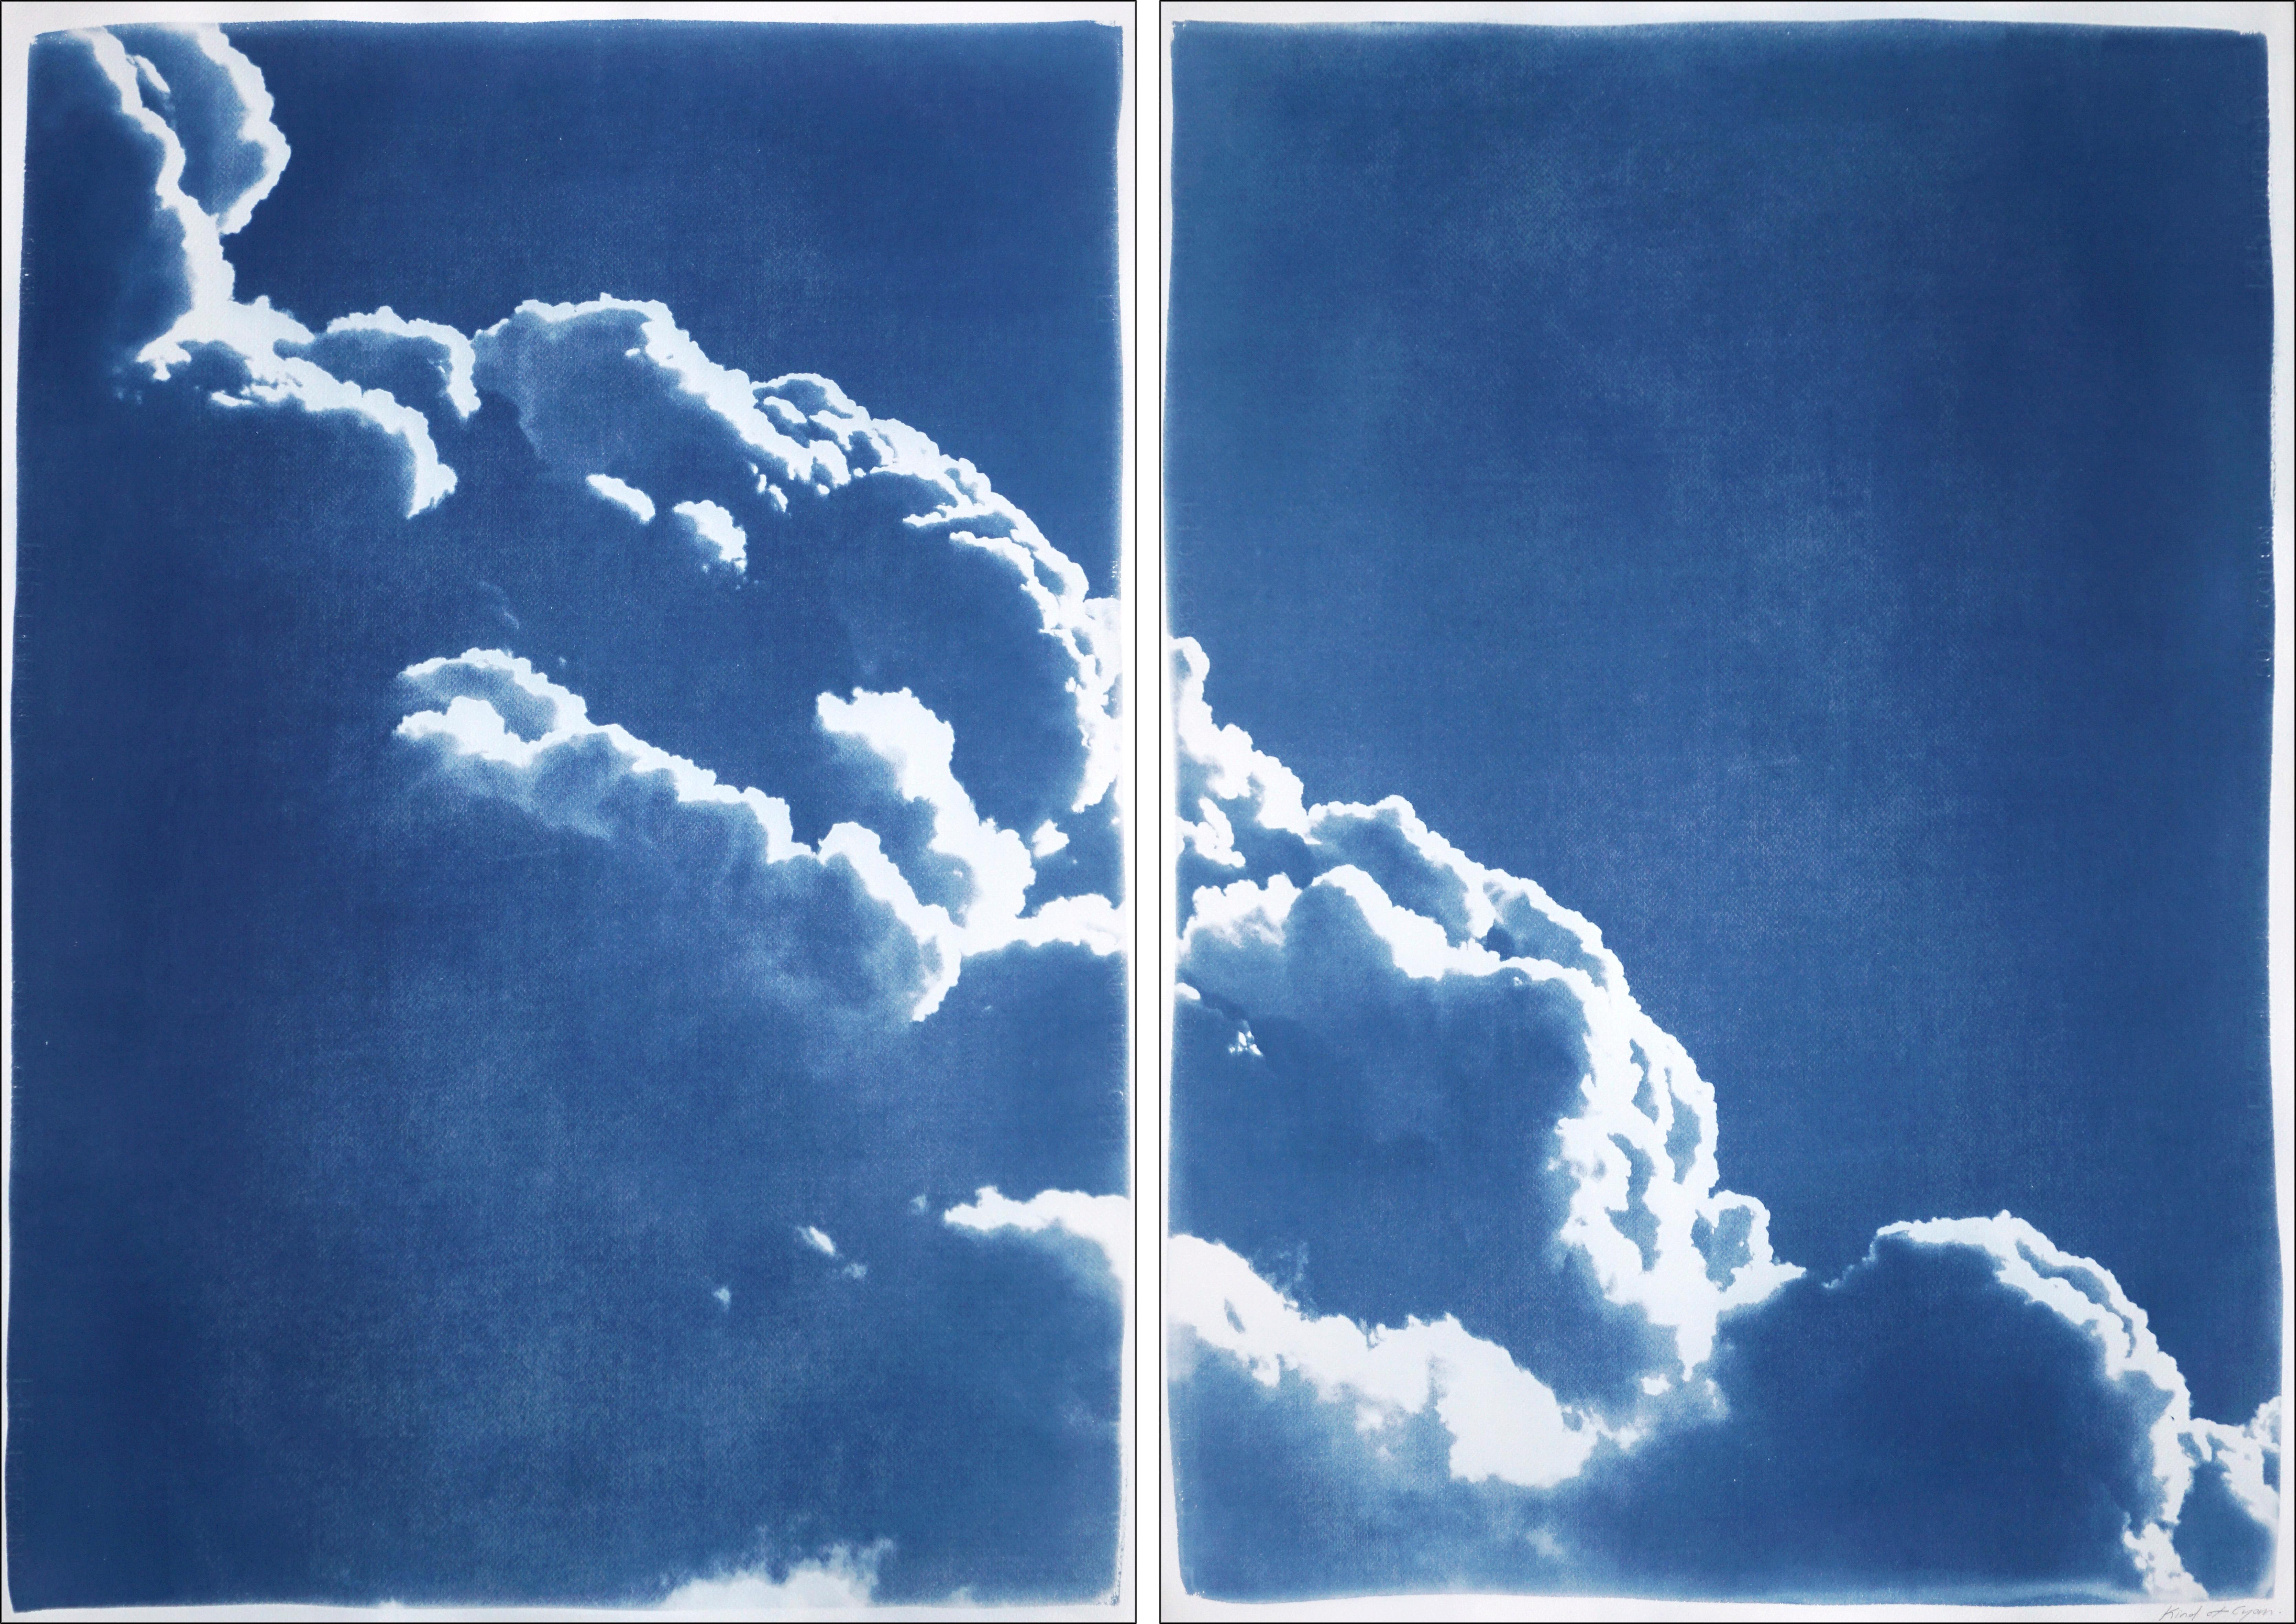 Diptych of Floating Clouds, Blue Tones Sky Scene Cyanotype Print of Silky Shapes